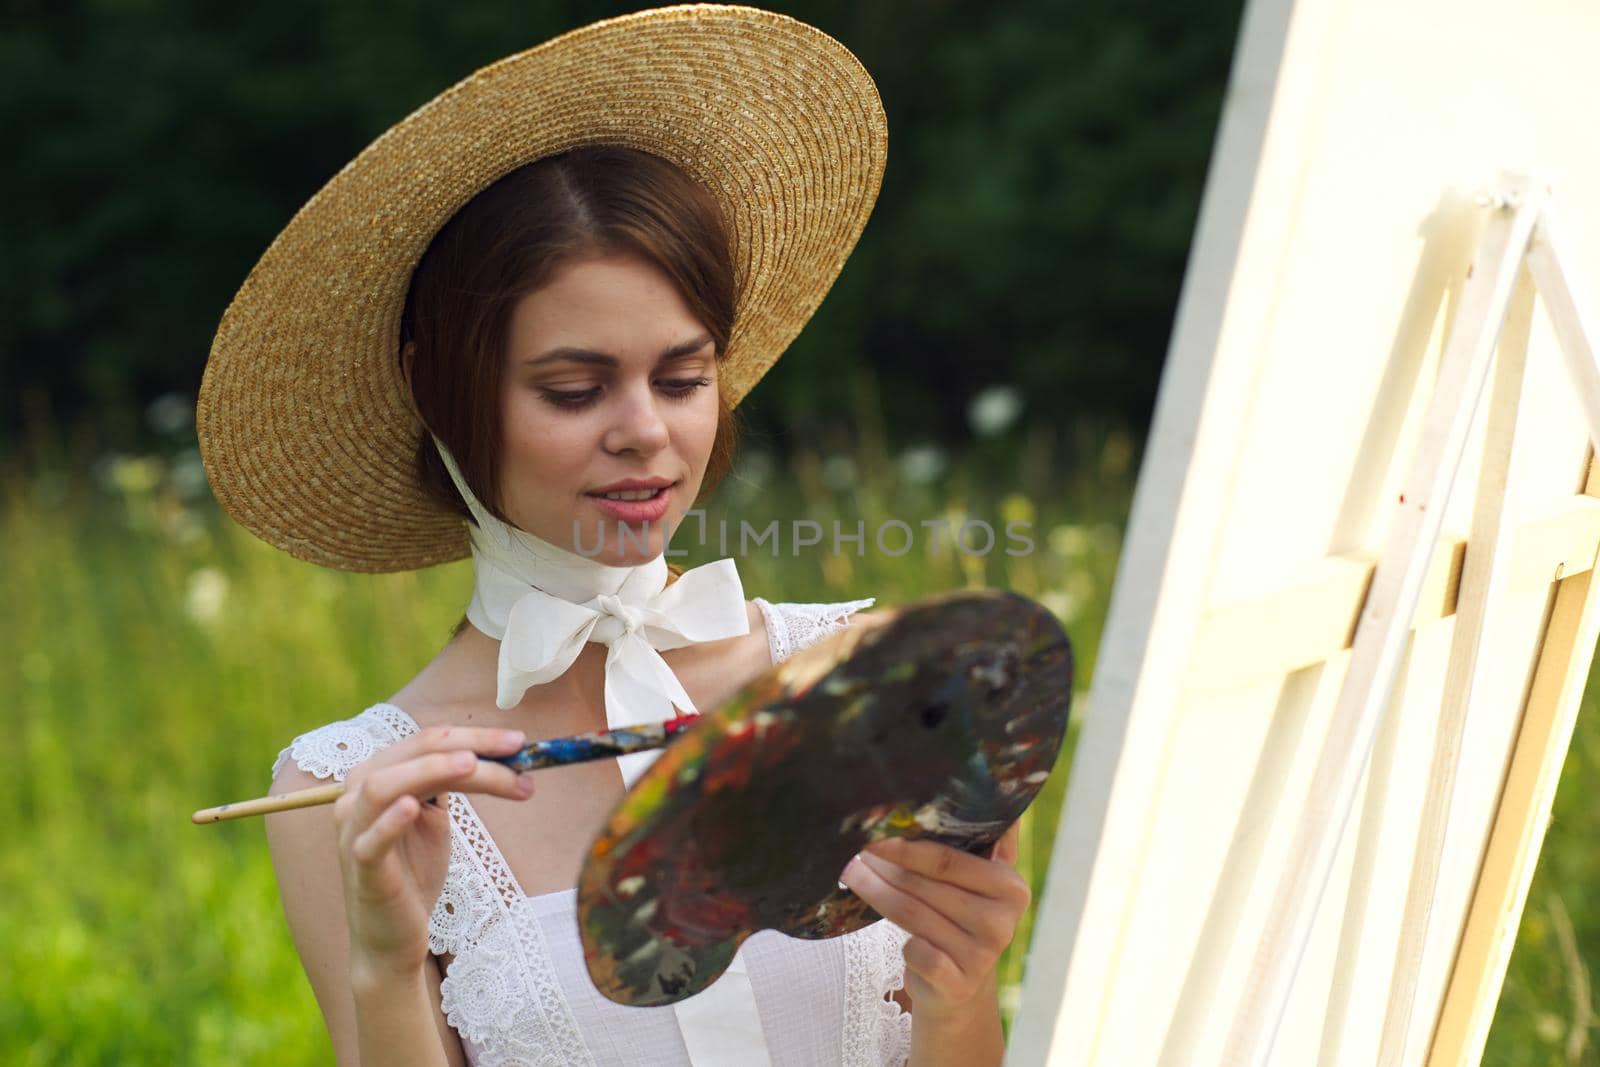 Woman in white dress artist paints on nature palette creative. High quality photo